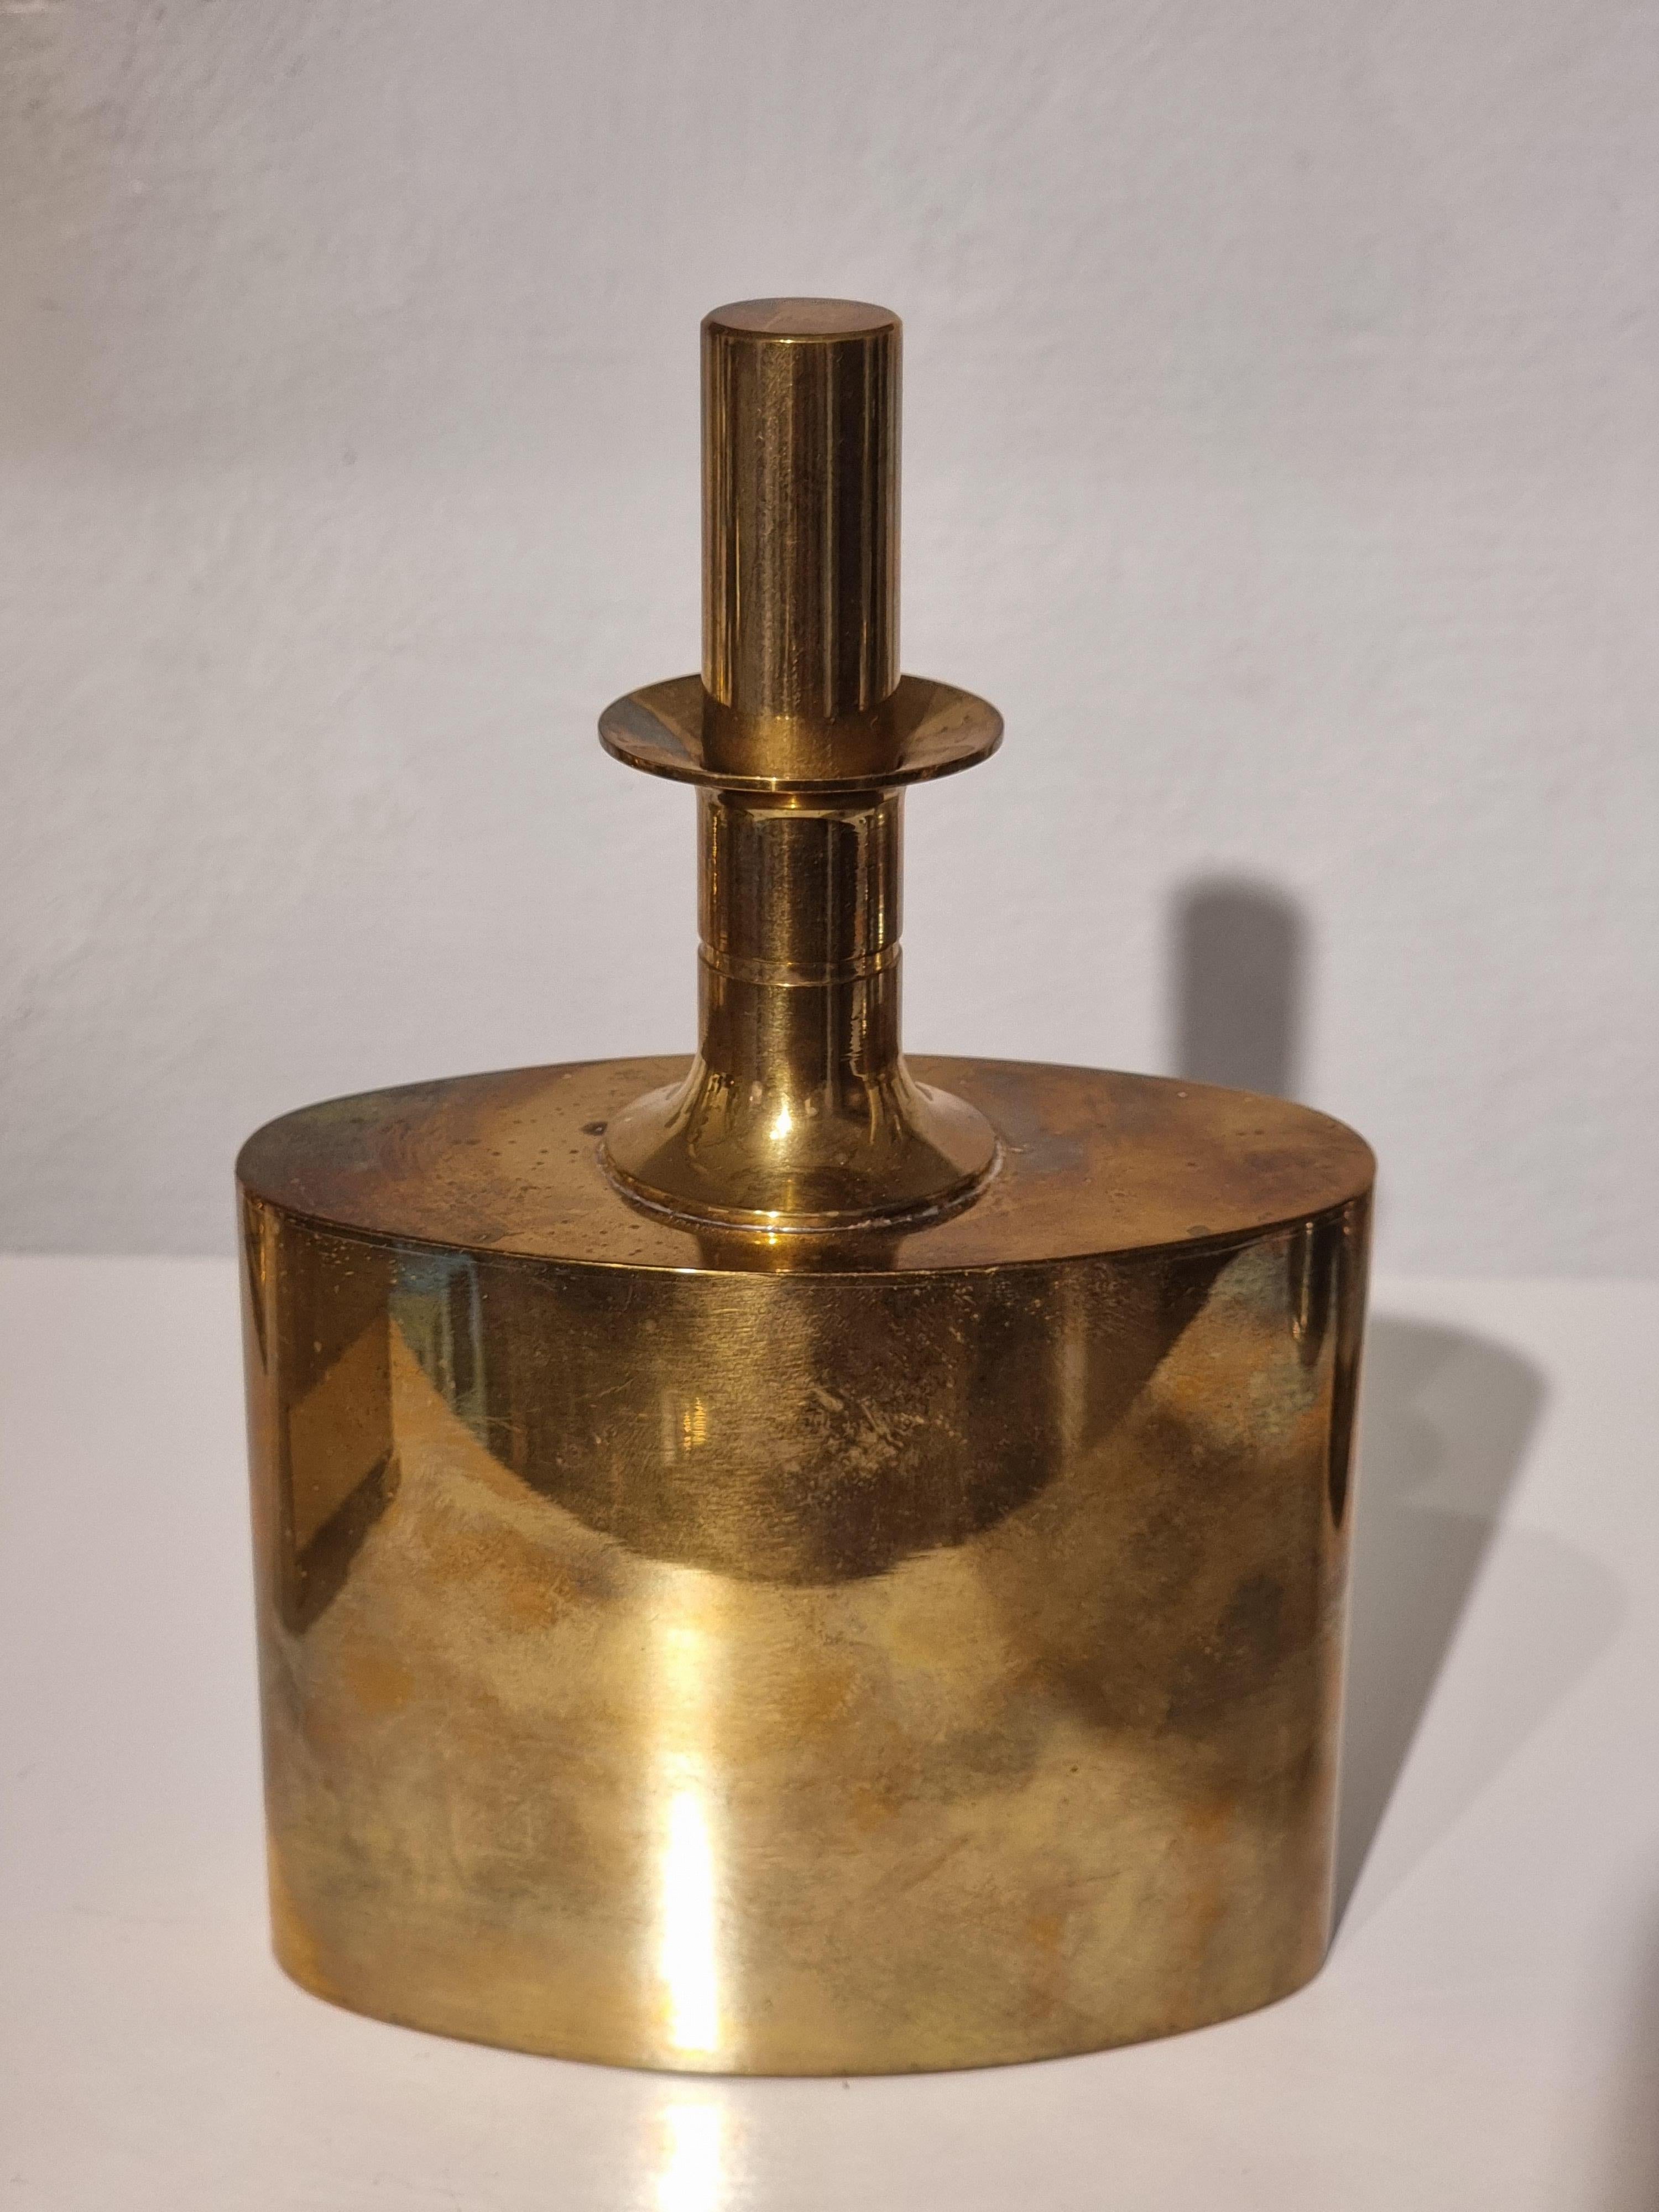 Gilded brass flask with stopper by Pierre Forssell for Skultuna Bruk, Sweden mid-1900s. 

Skultuna Bruk was founded in 1607. This flask has its hallmarks and is one of the companies most iconic works by Pierre Forssell. 
